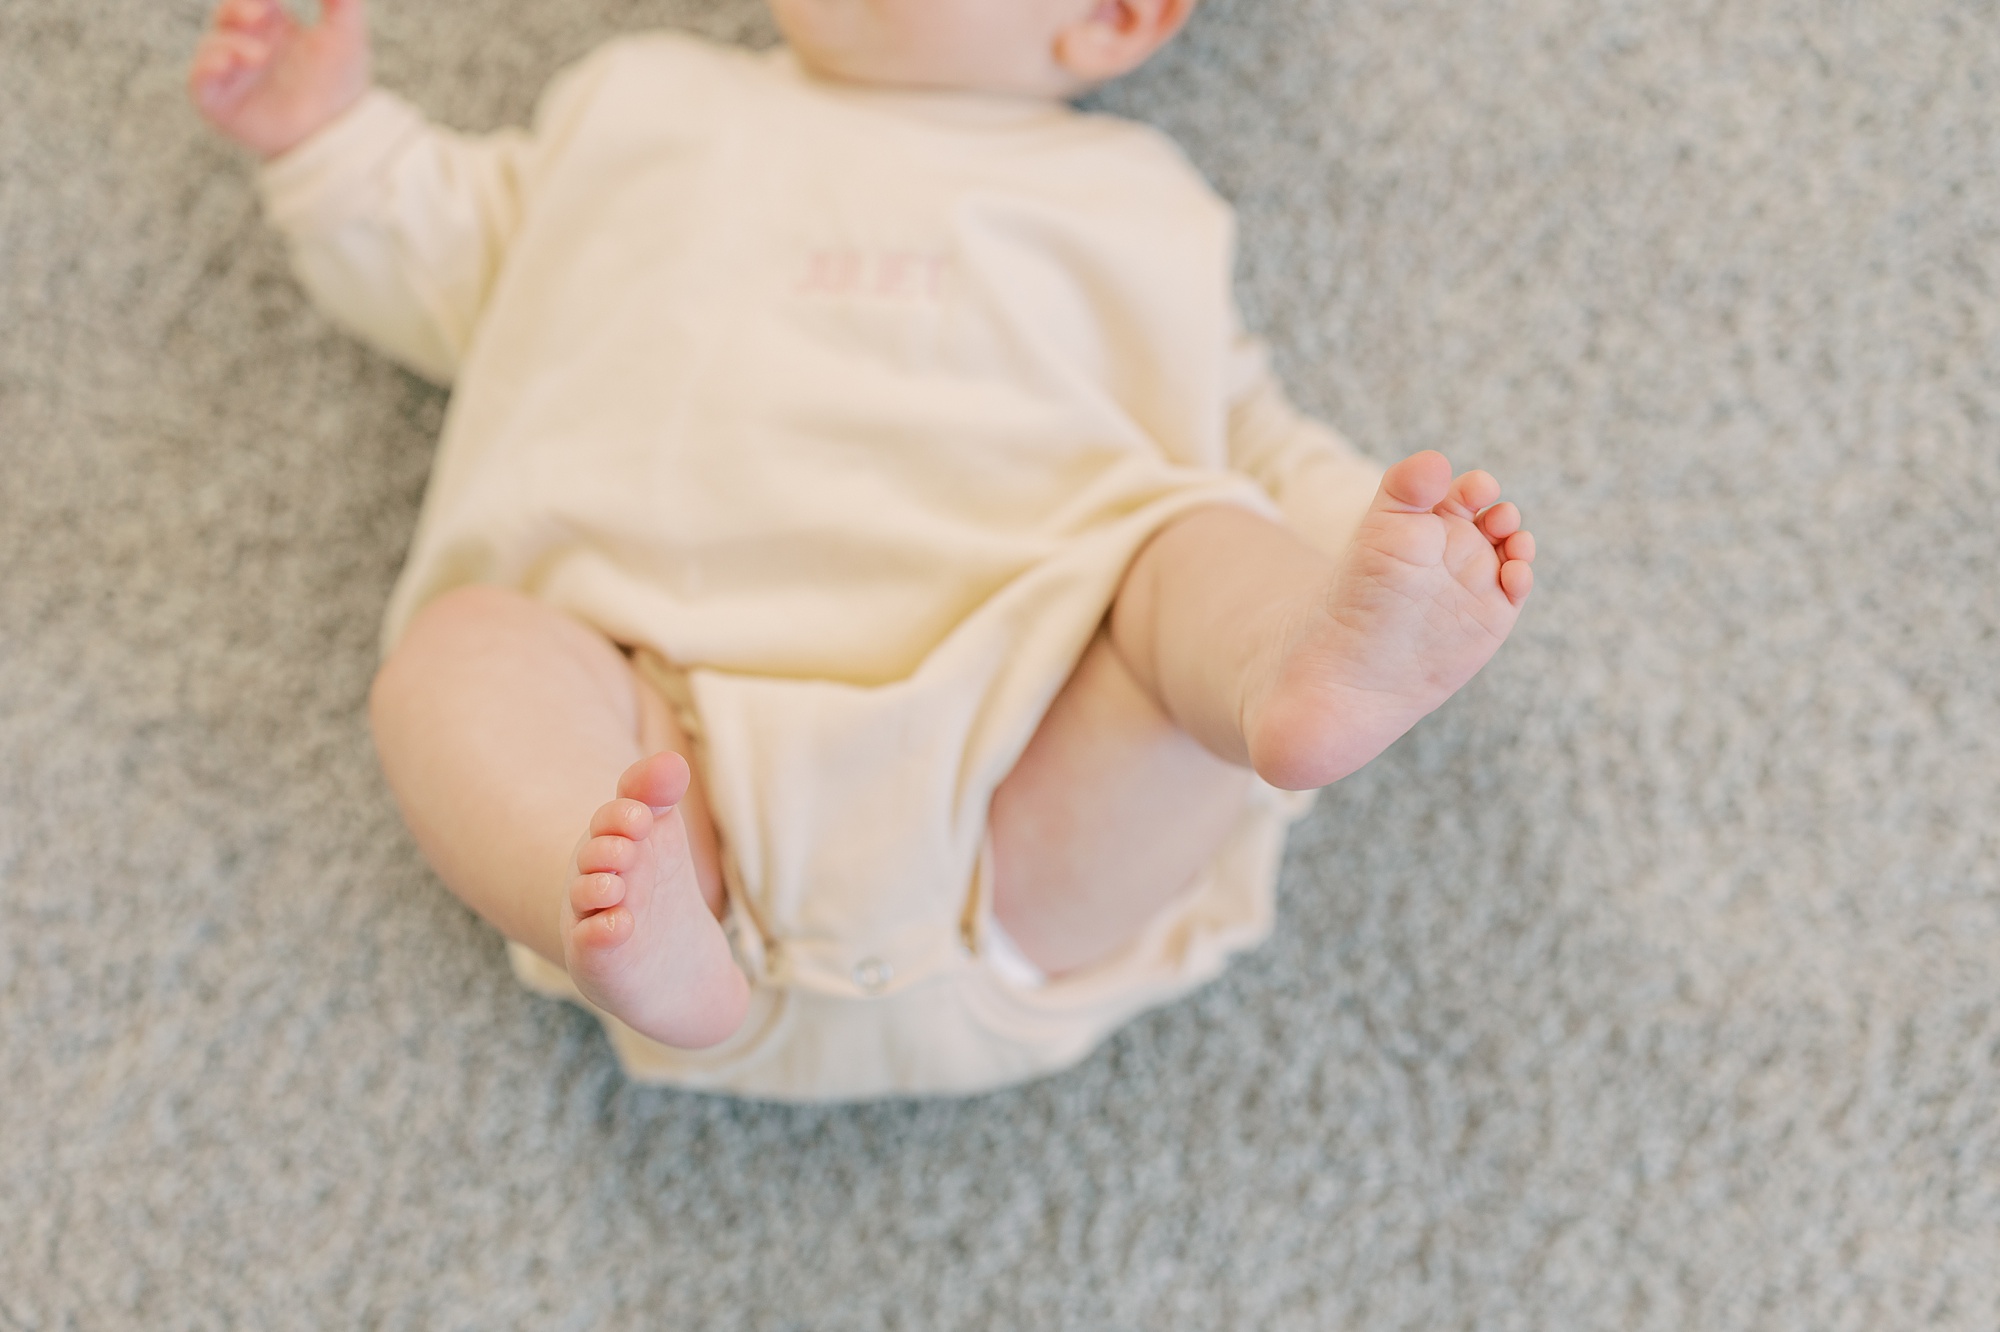 baby lays on floor of nursery in cream colored sweater 